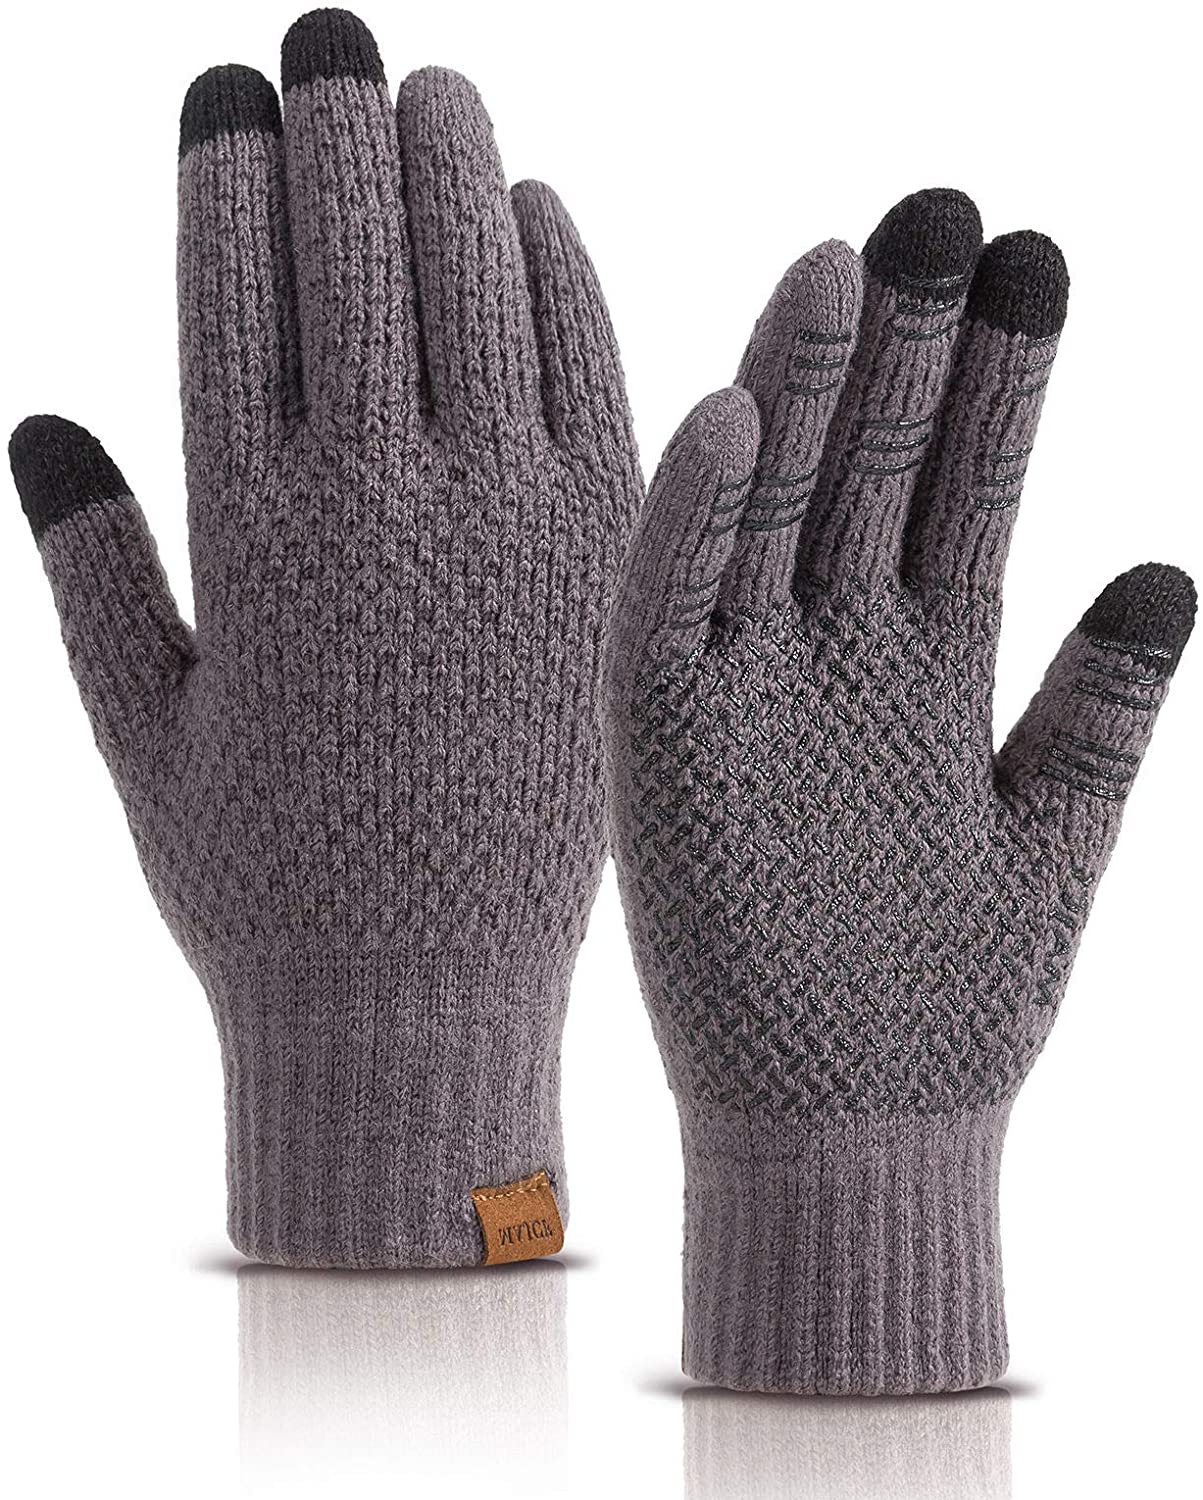 MAJCF Winter Gloves for Men Women,Touch Screen Gloves,Thermal Warm Cold Weather Gloves Fleece Lined